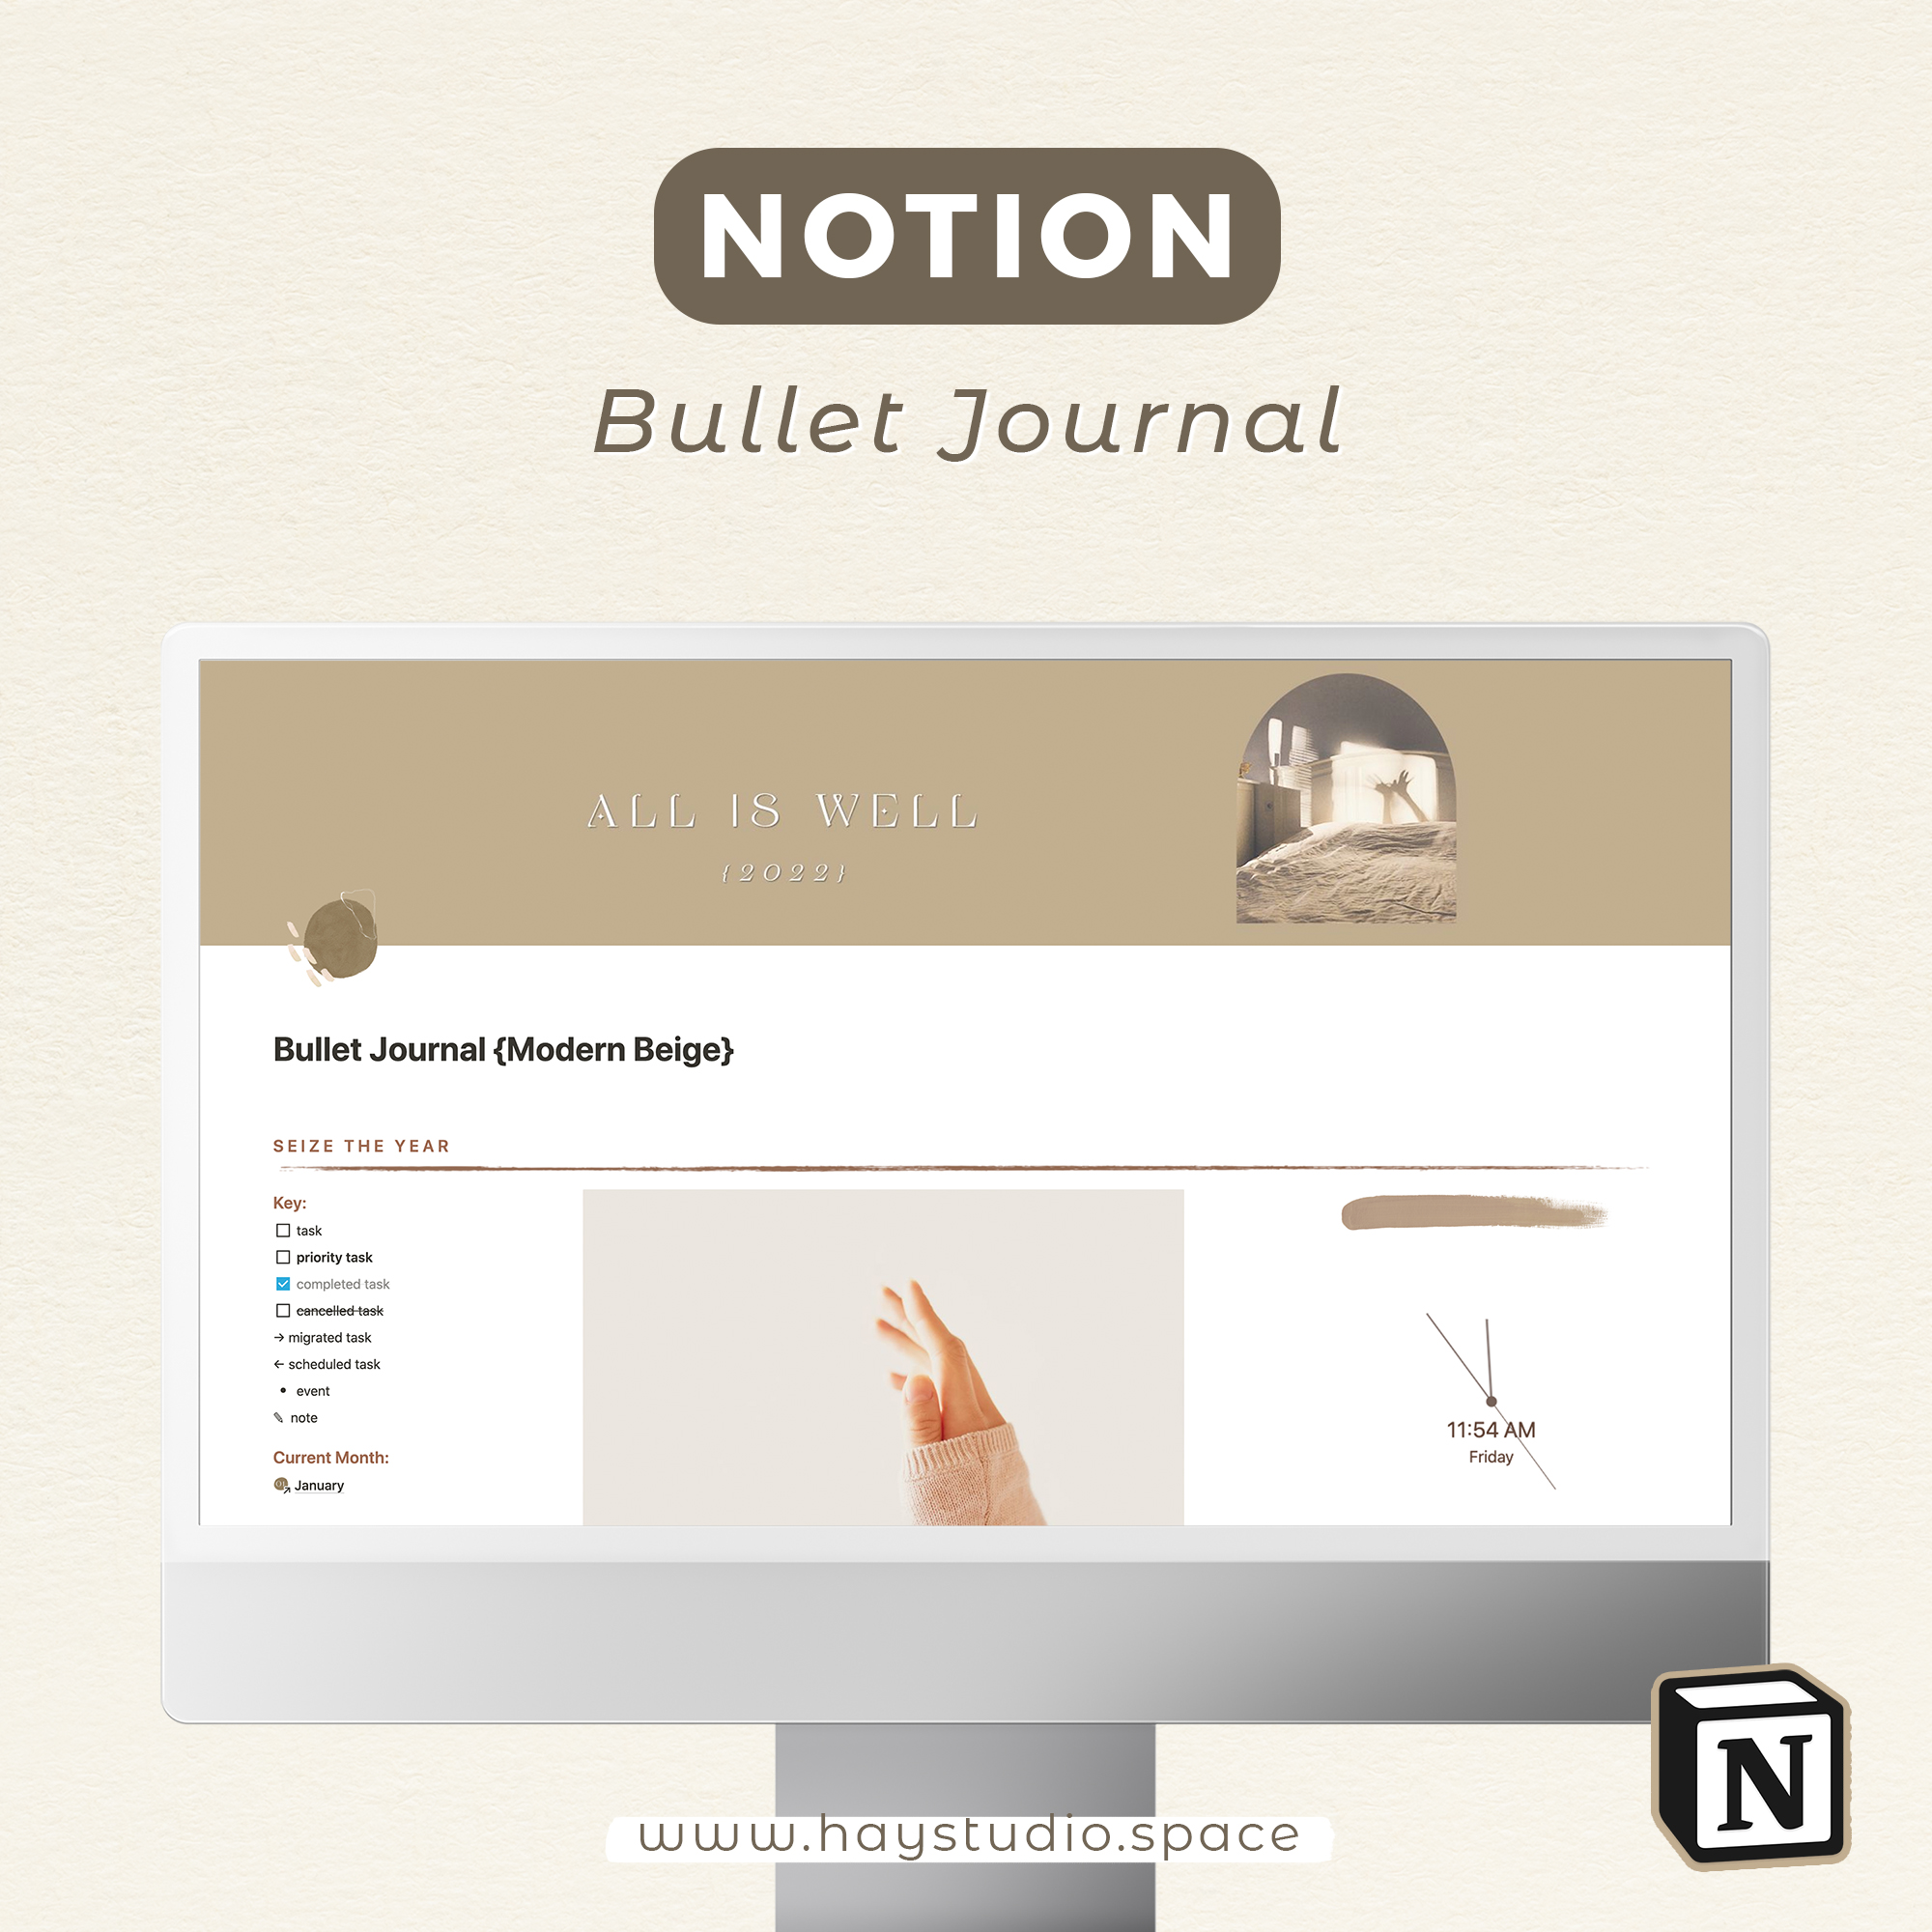 how-to-create-a-notion-bullet-journal-free-notion-template-hay-studio